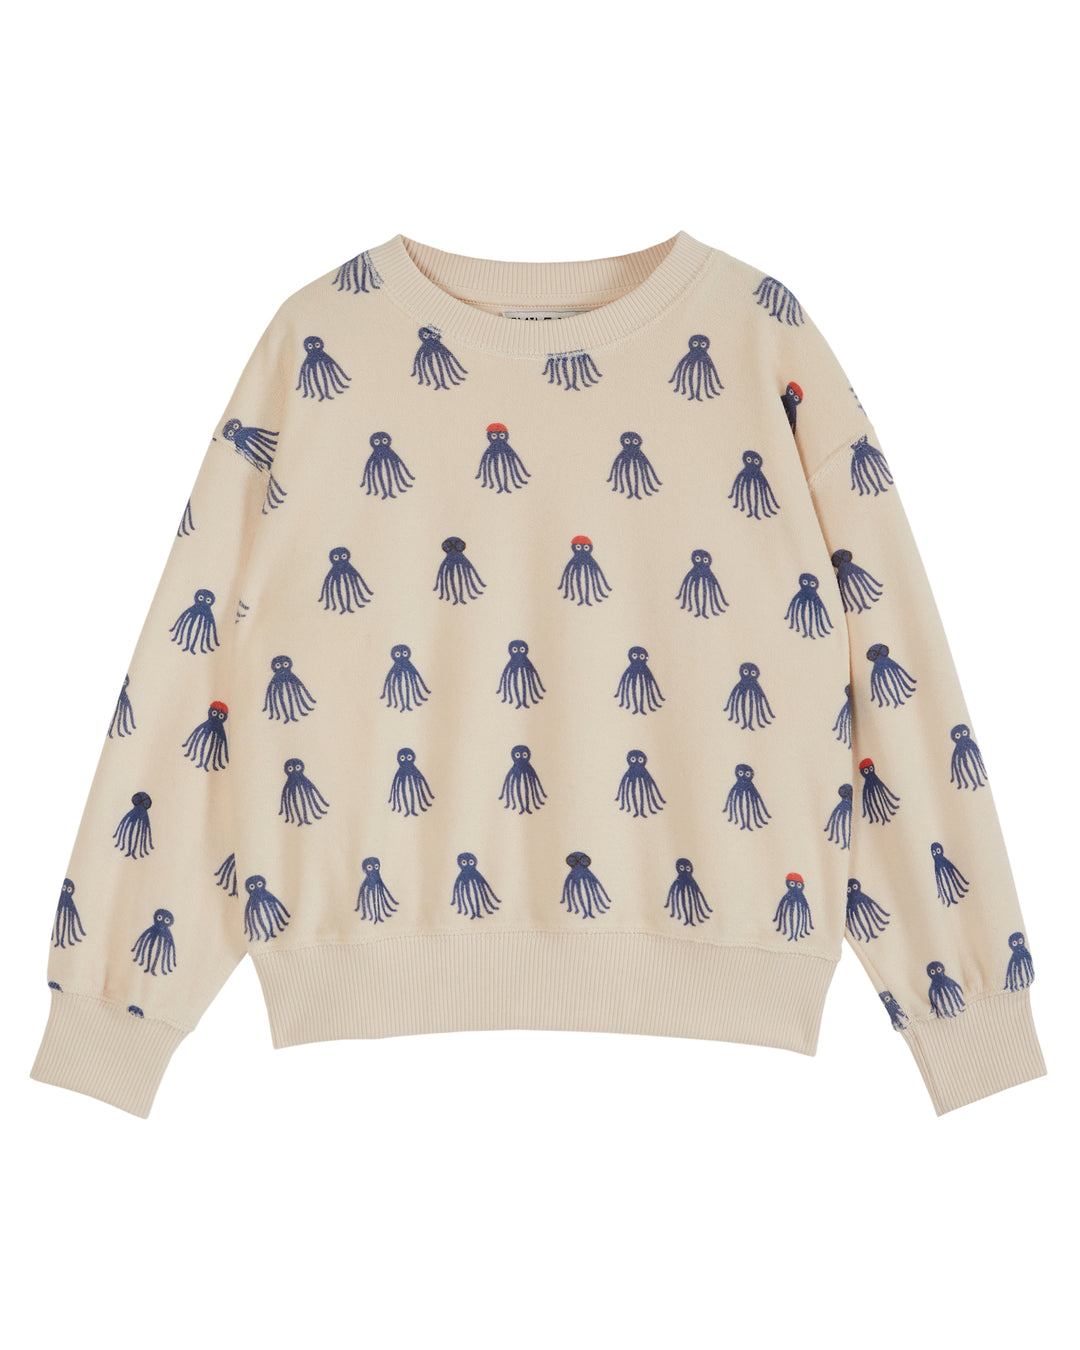 Sweater Octopus Printed All Over Creme Blue